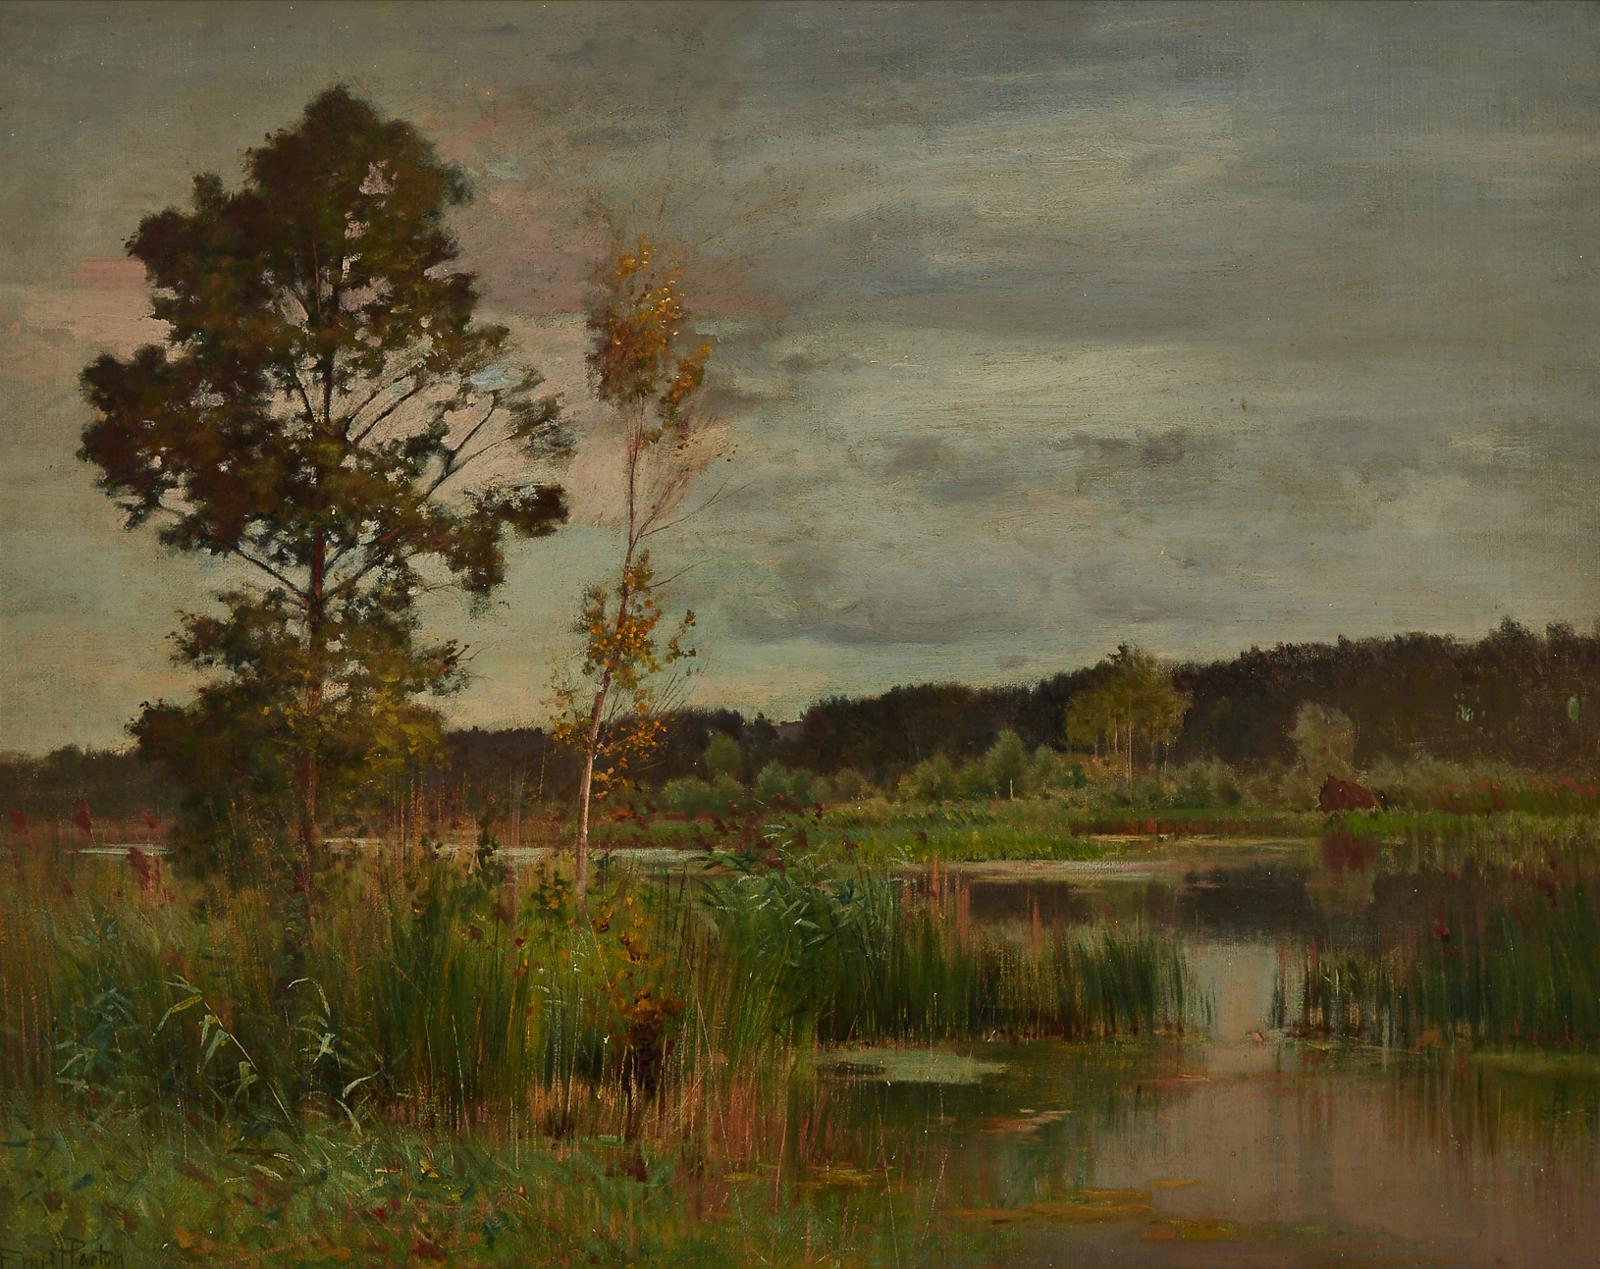 Ernest Parton (1845-1933) - The Water Meadows, Picardy, France